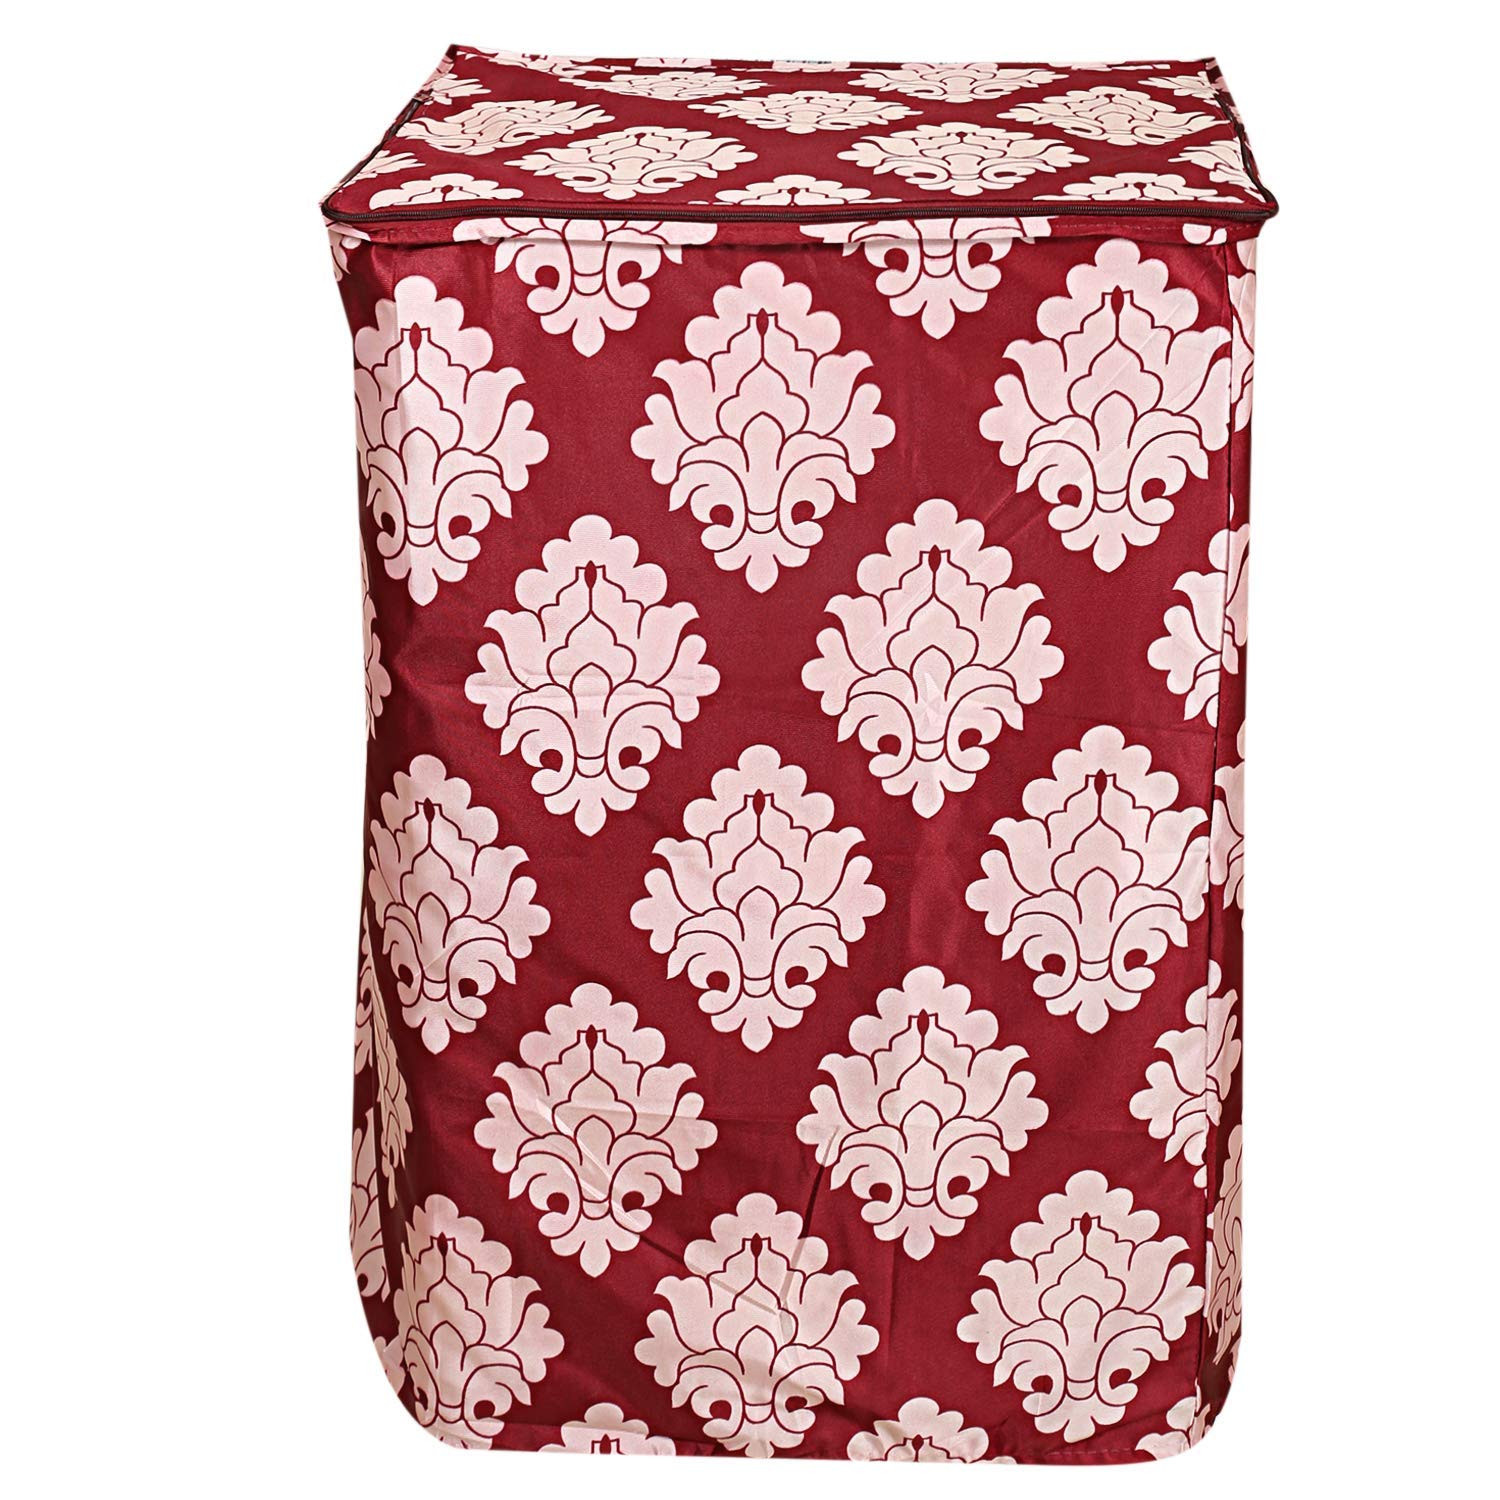 Kuber Industries Floral Design Cotton Top Load Fully Automatic Washing Machine Cover - Maroon